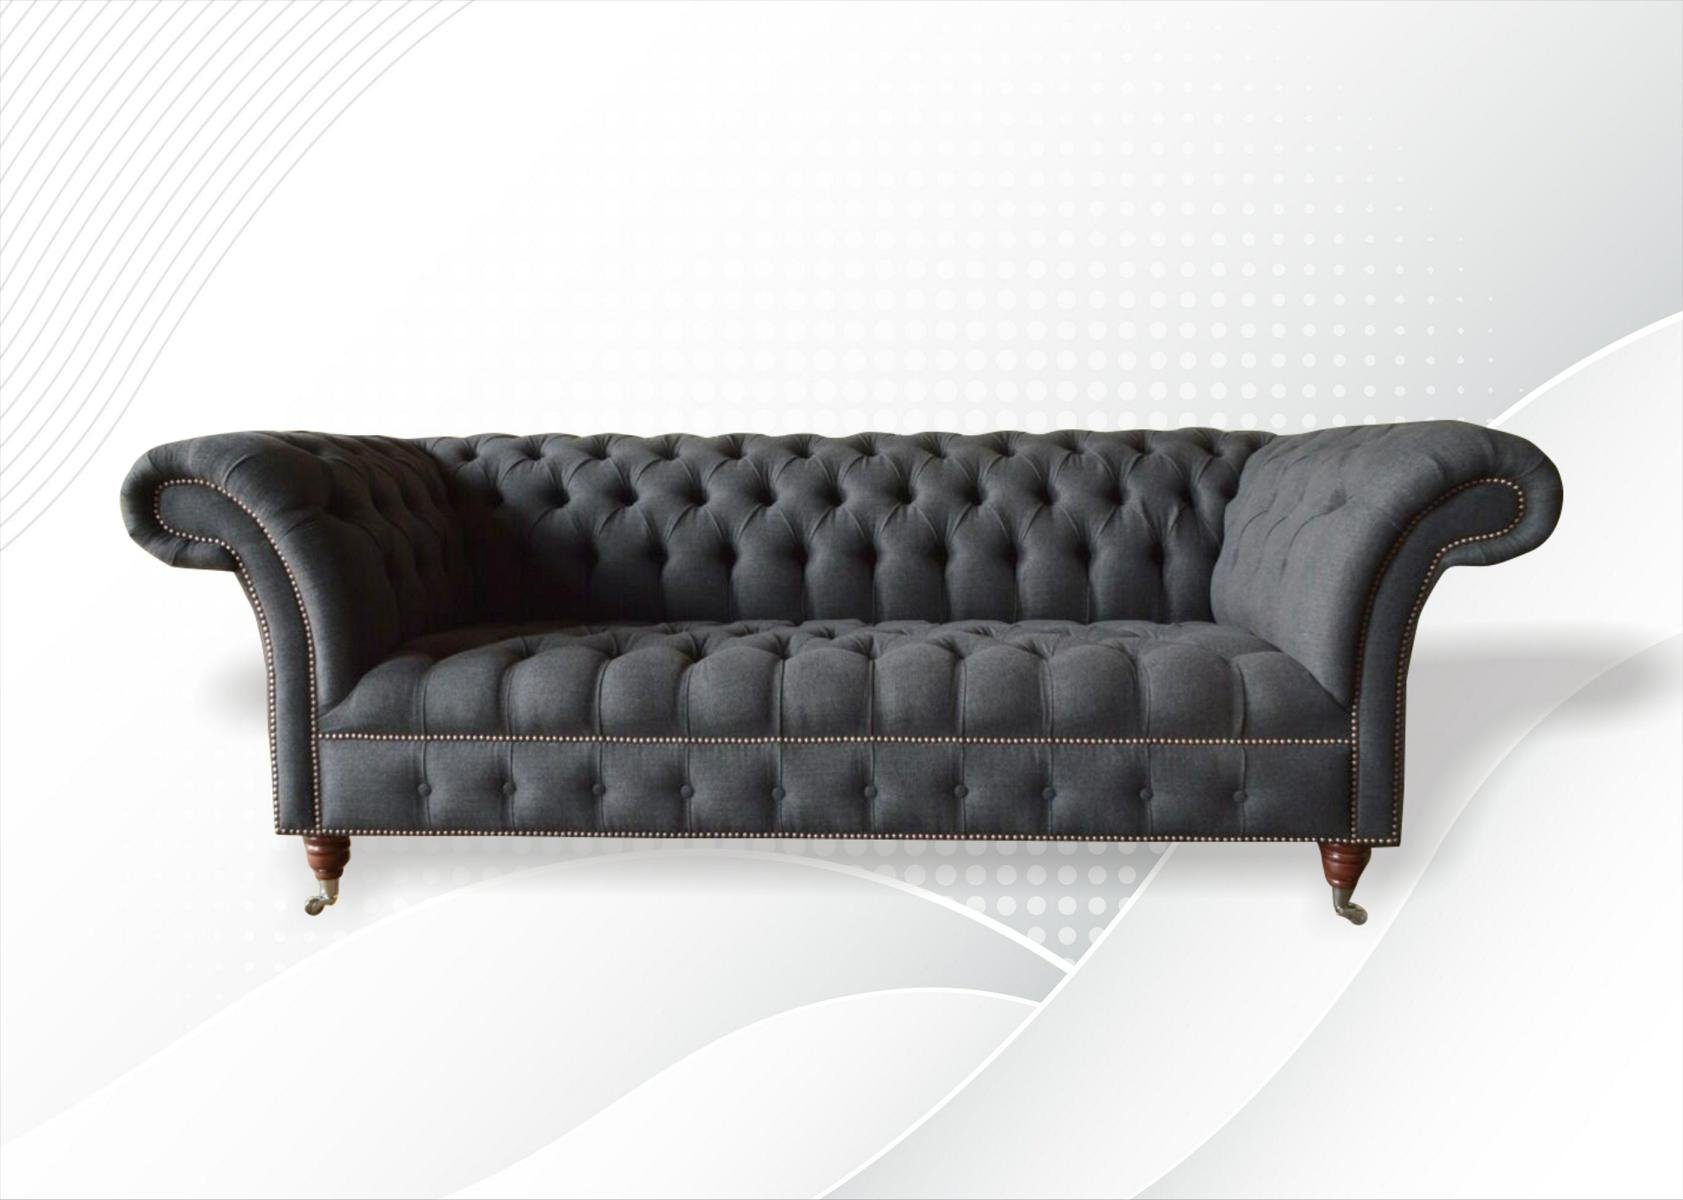 JVmoebel Chesterfield-Sofa, Chesterfield 3 Sitzer Design Sofa Couch 225 cm | Chesterfield-Sofas